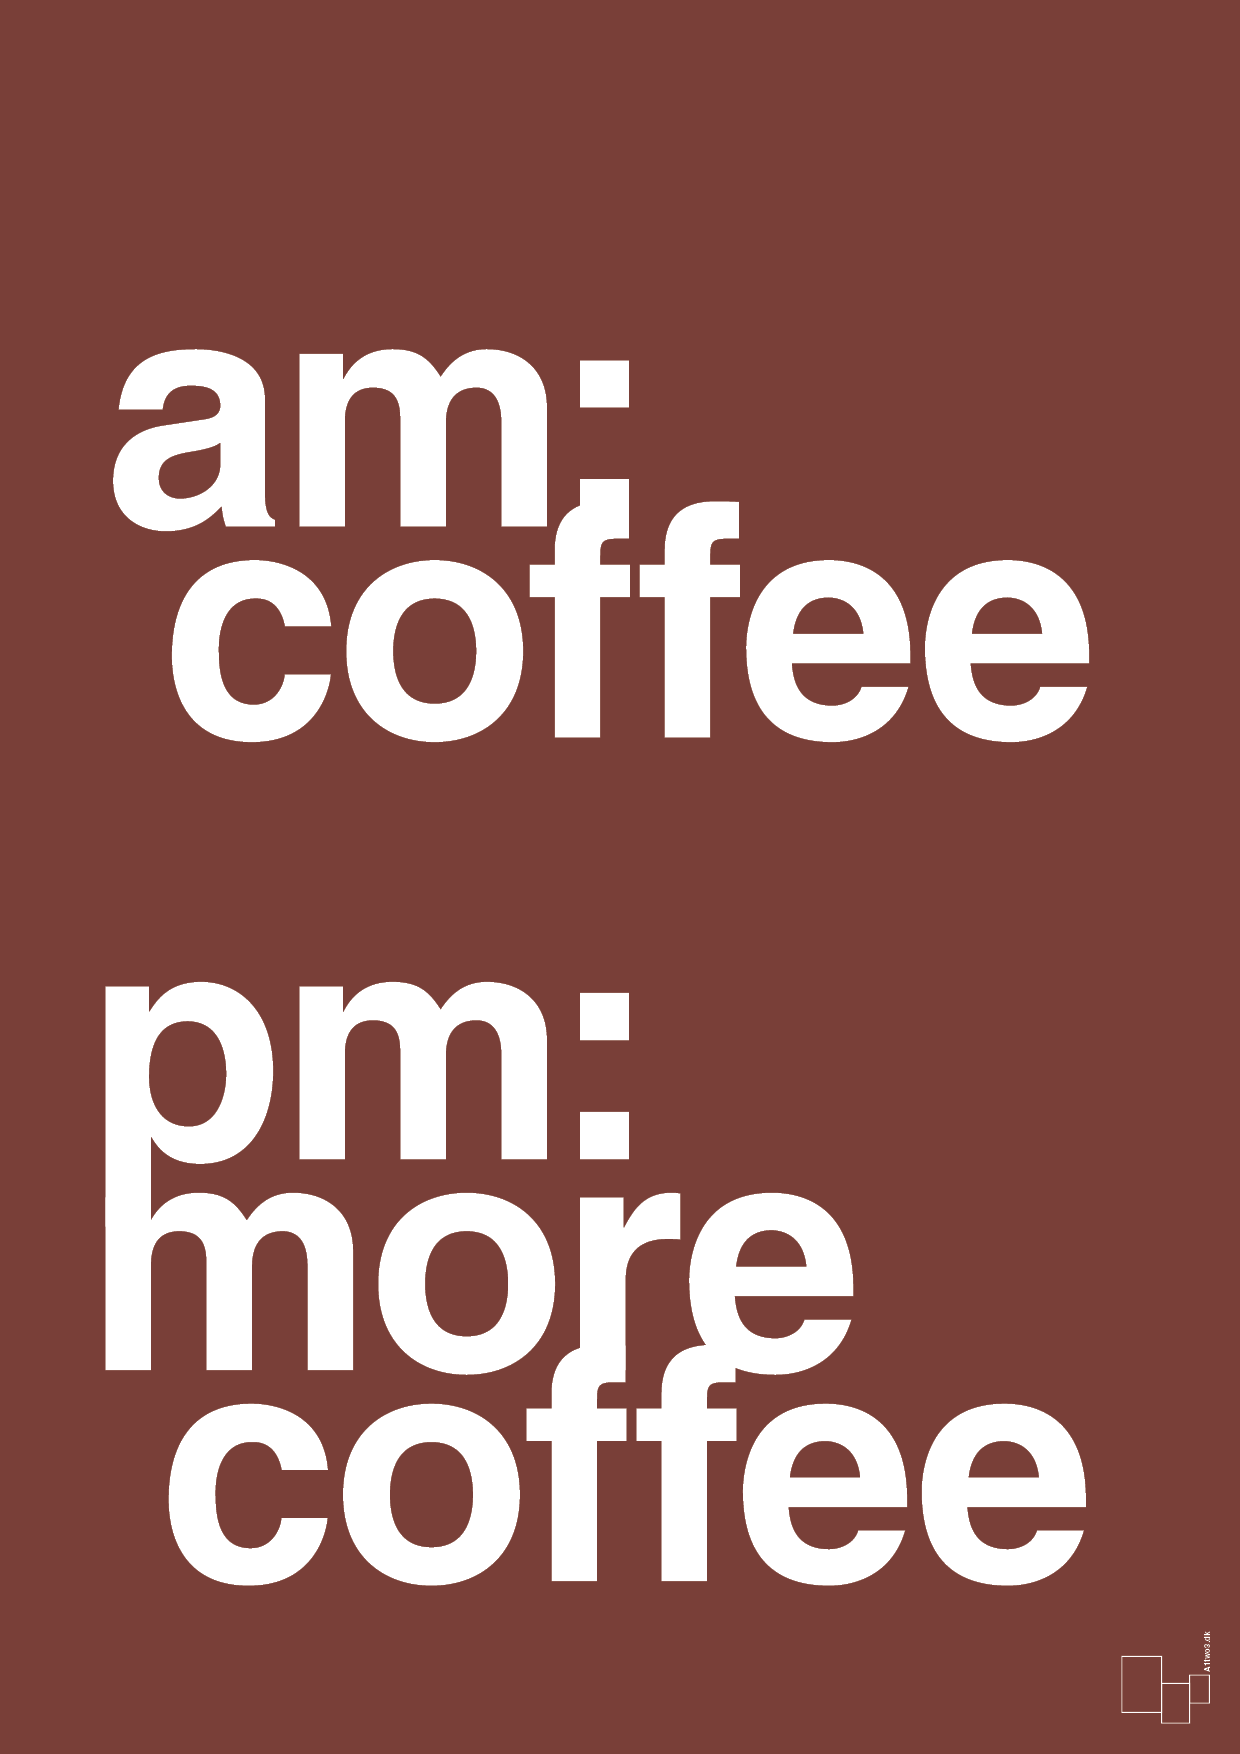 am coffee pm more coffee - Plakat med Ordsprog i Red Pepper